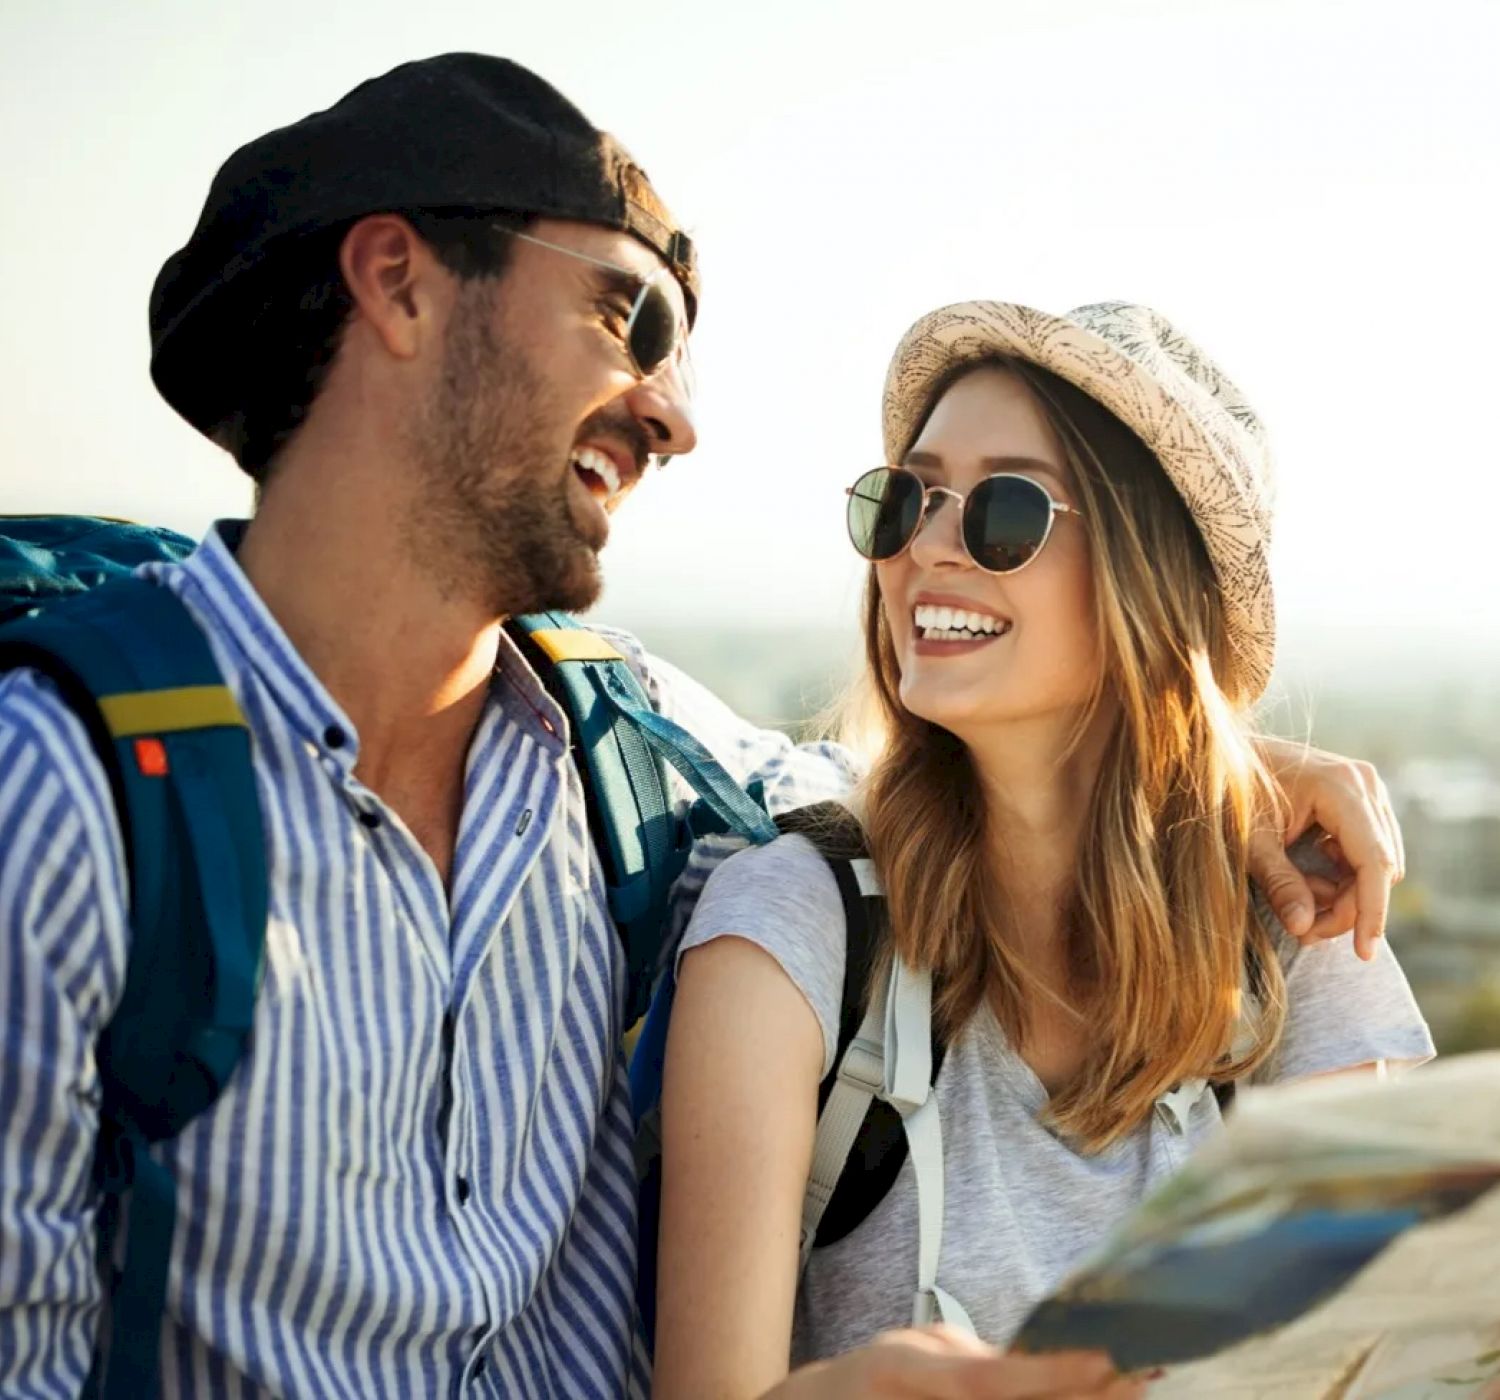 A smiling couple wearing sunglasses and backpacks looks at a map outdoors. They appear to be enjoying a sunny day of exploration.